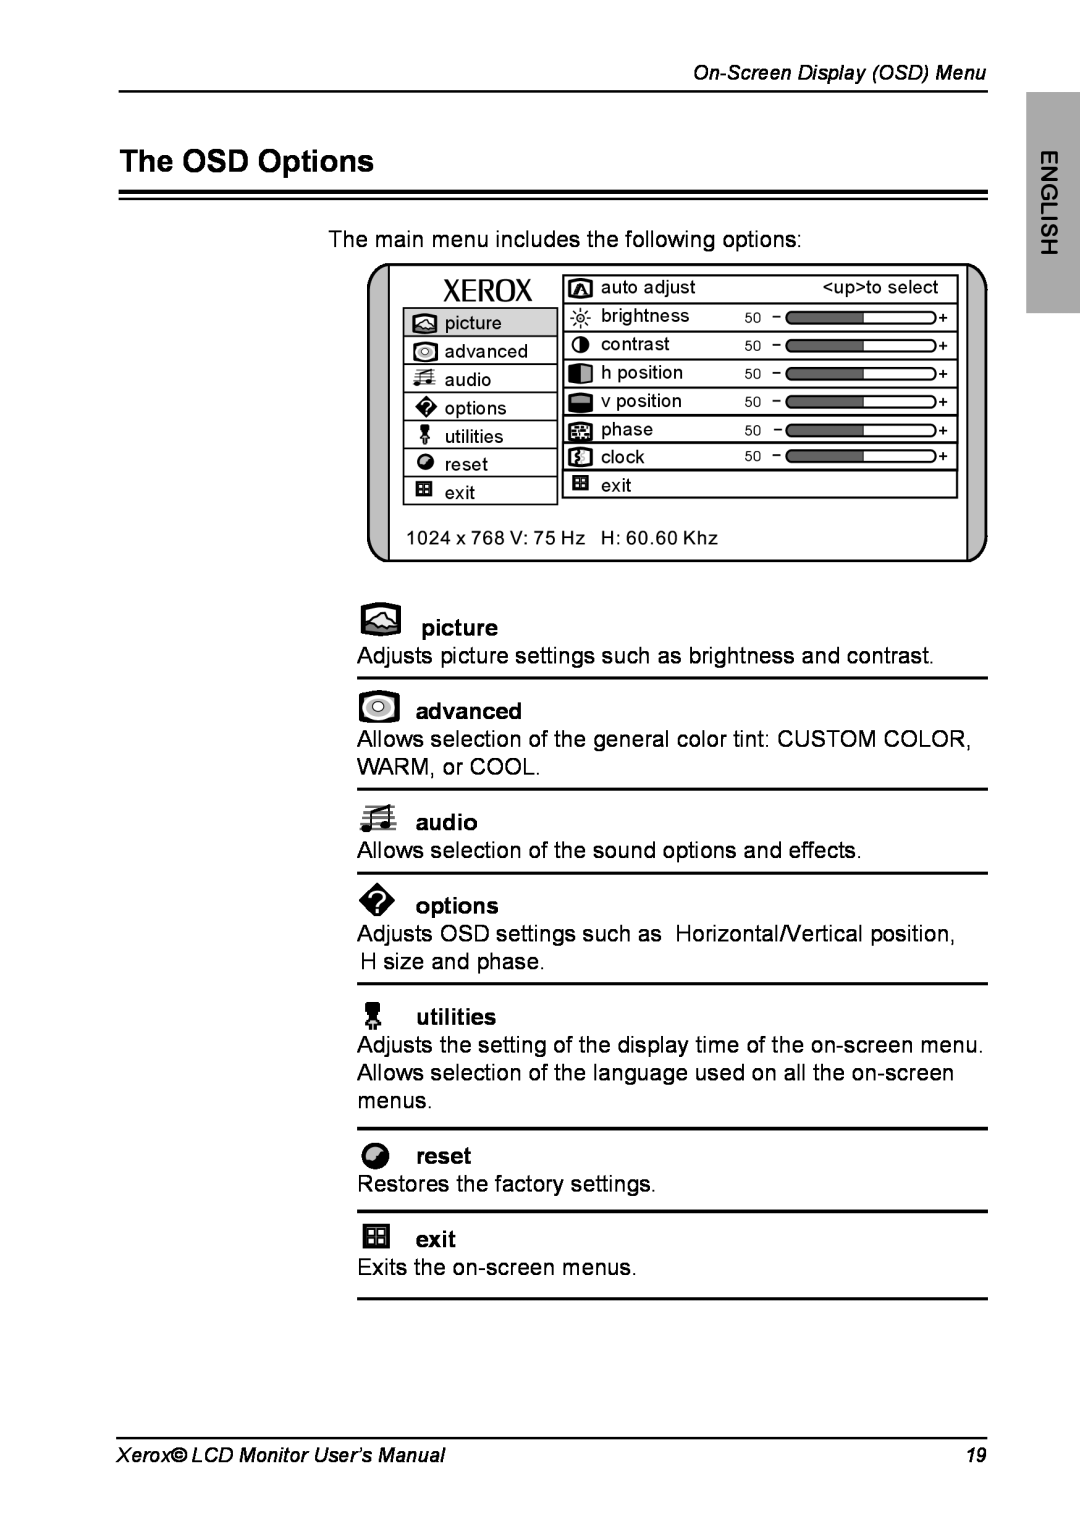 Xerox XM7-19w manual The OSD Options, picture, advanced, audio, options, utilities, reset, exit, English 